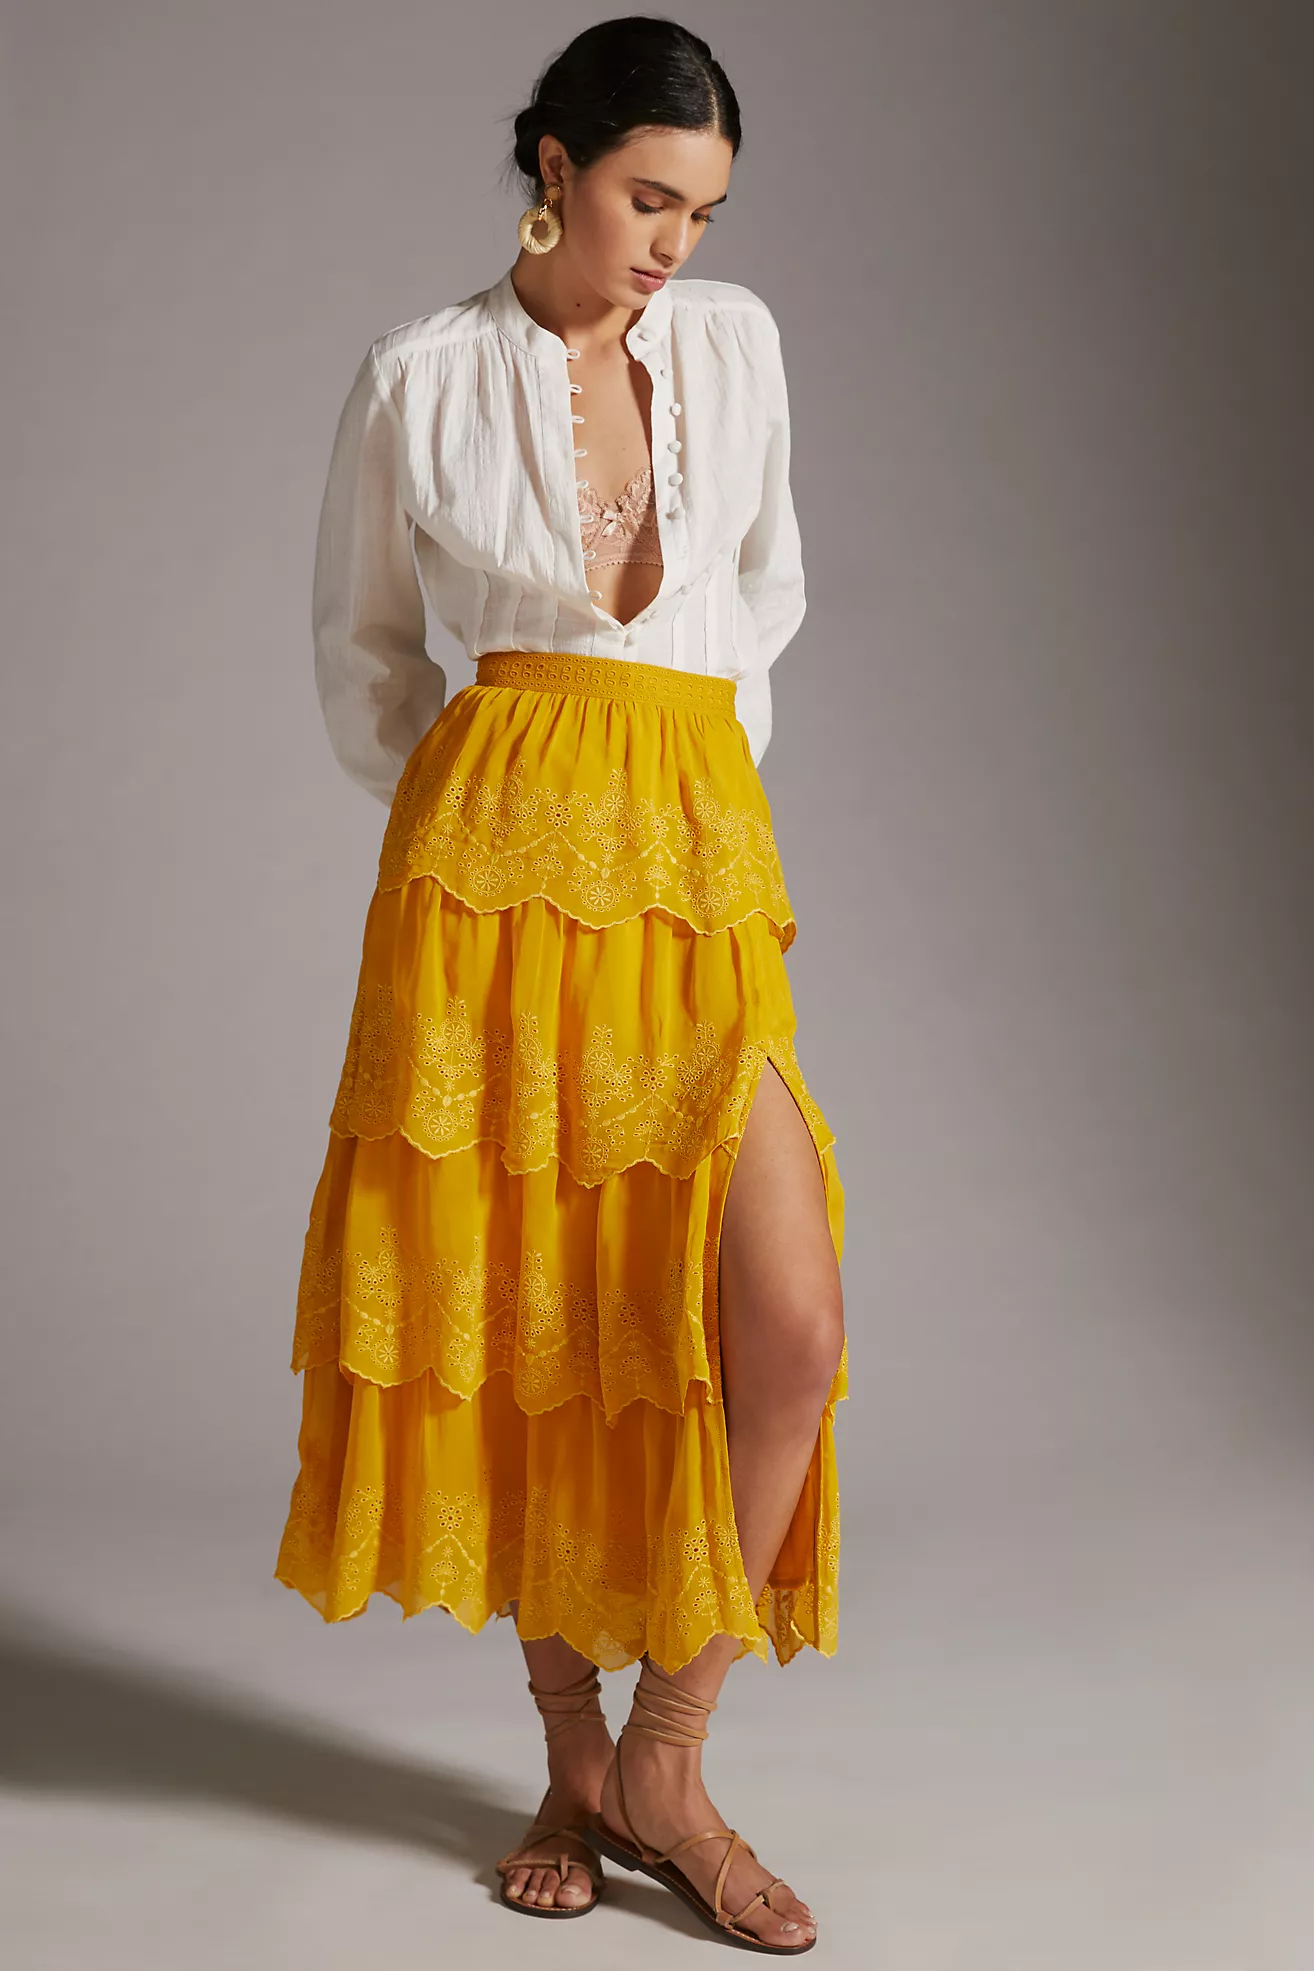 tiered lace midi skirt yellow skirt for spring marigold skirt for summer fun skirt for summer pretty skirt for spring